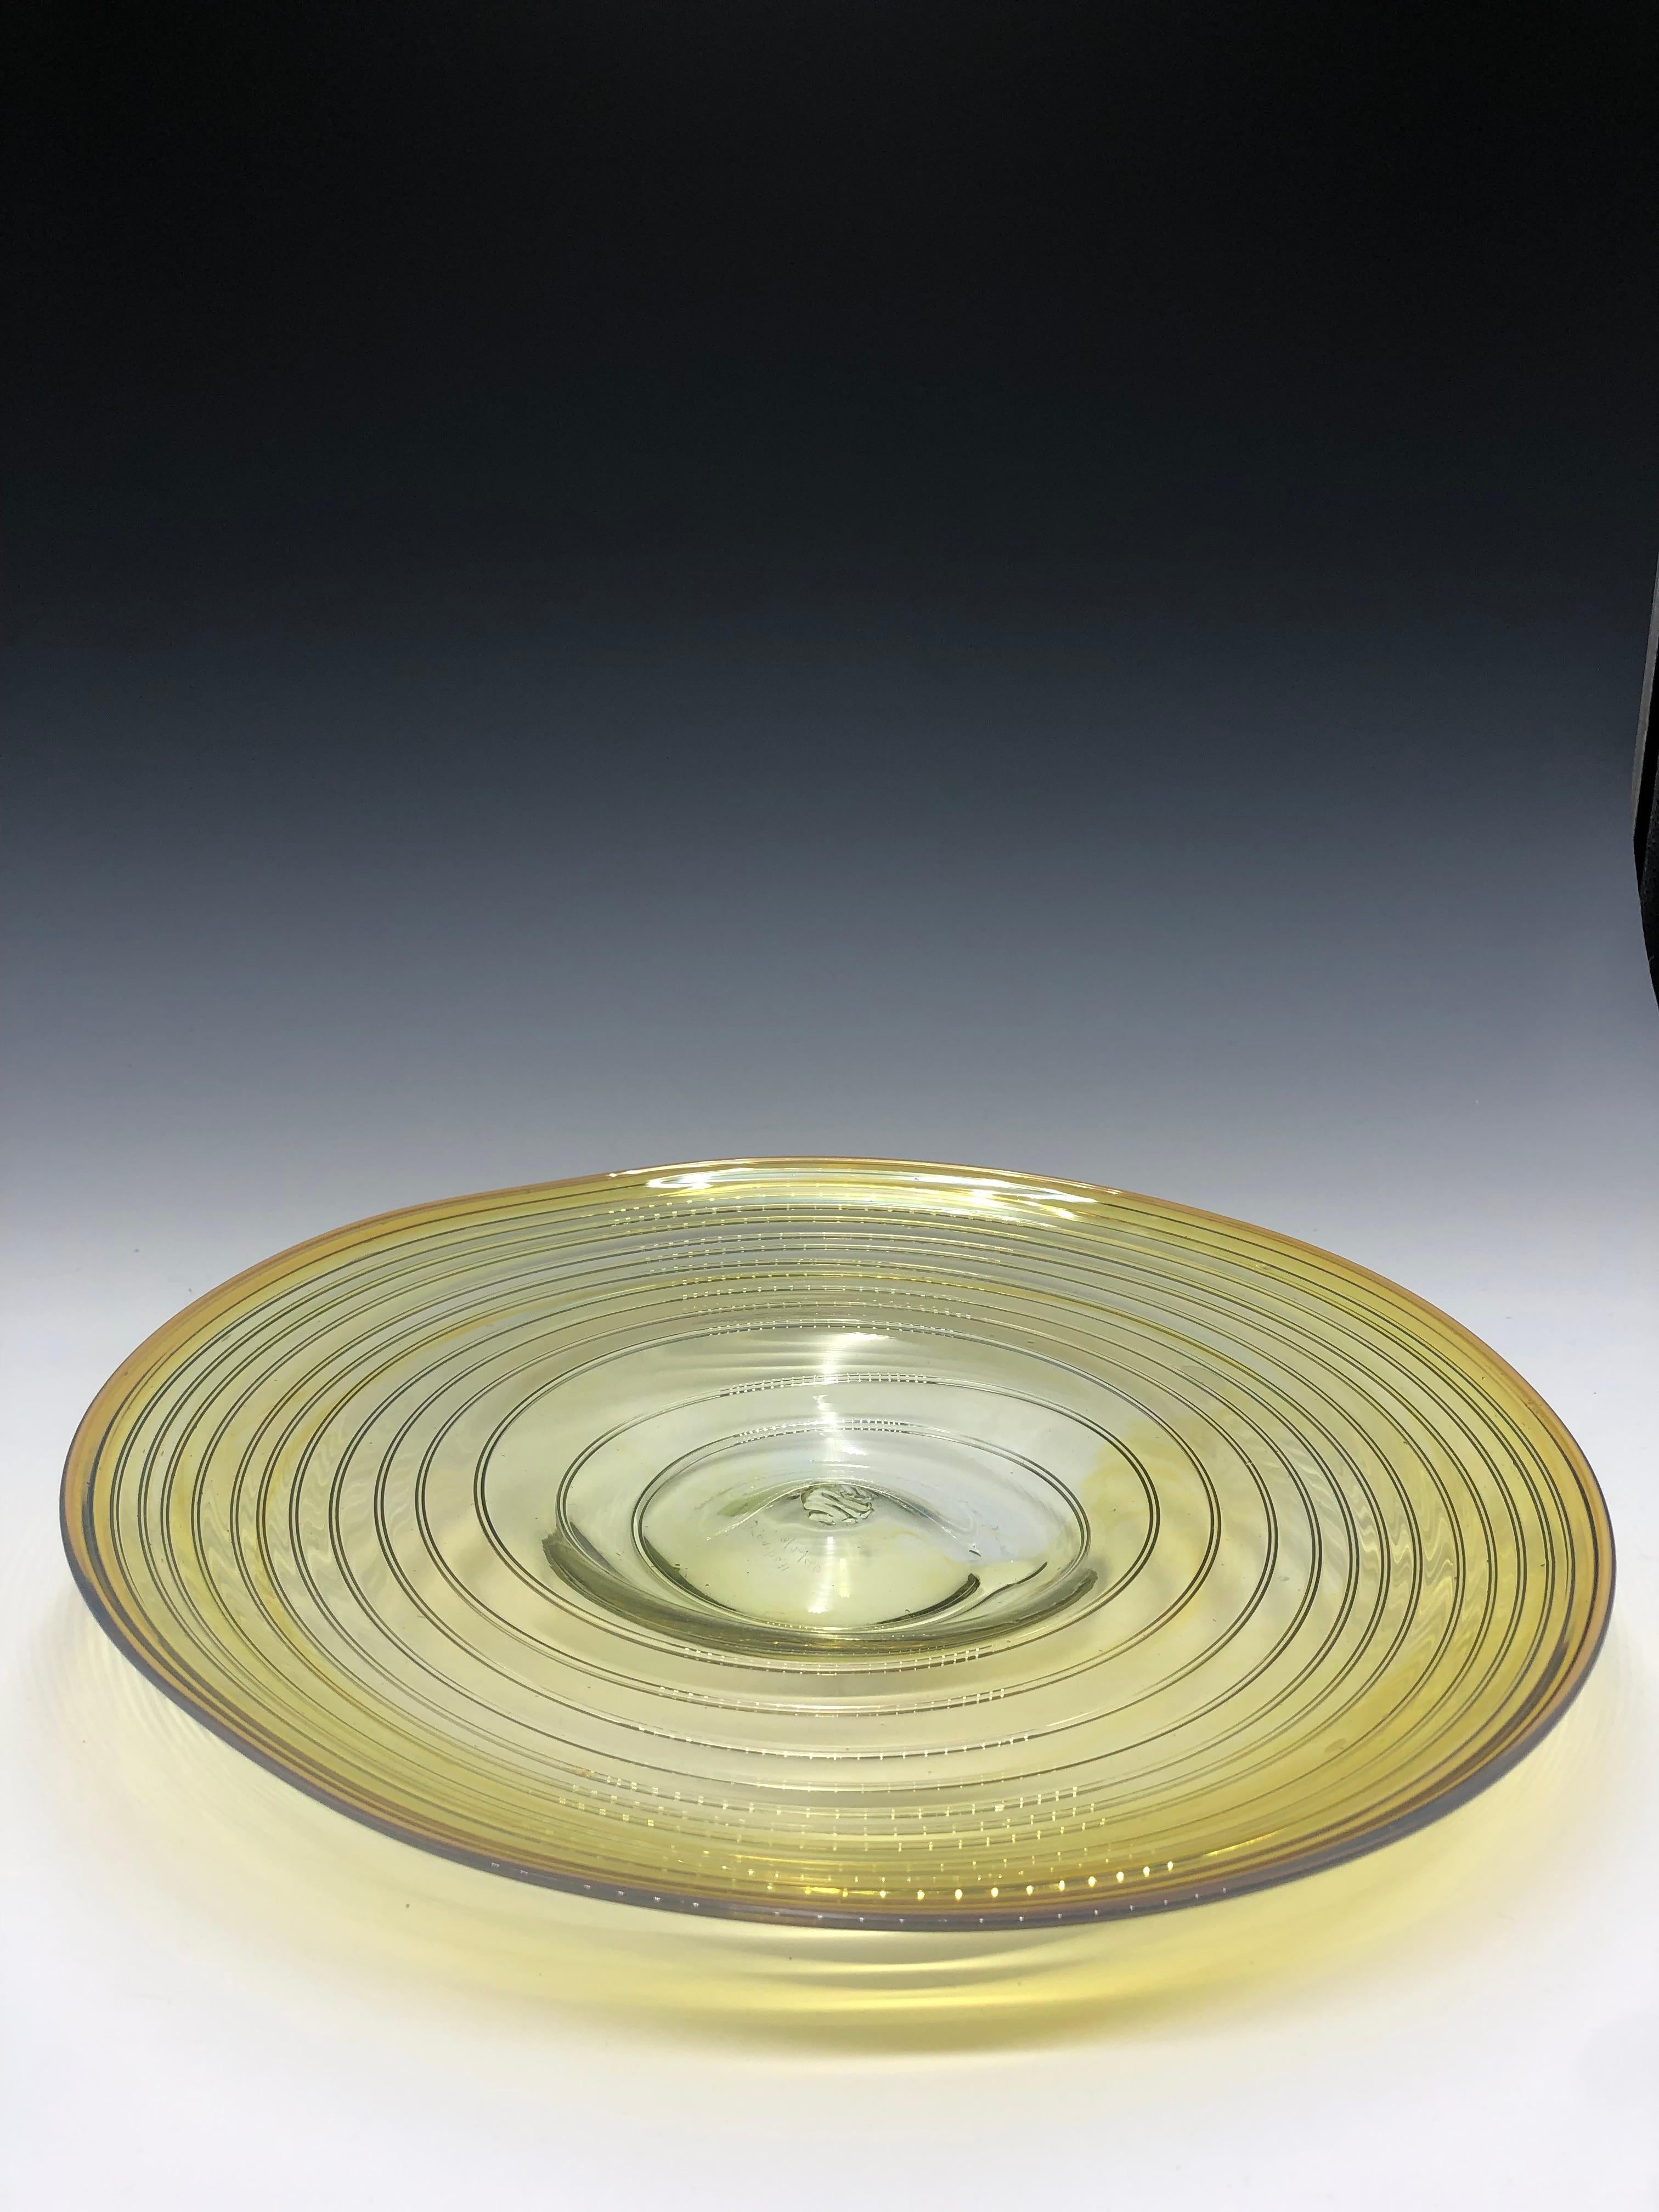 Beautiful yellow glass centerpiece created by Peter Bramhall, signed and dated 8/2/80. The swirl design platter is uniquely shaped and is fully hand-blown, leaving a subtle pontil mark on its base. The glass itself is a stunning clear yellow with a